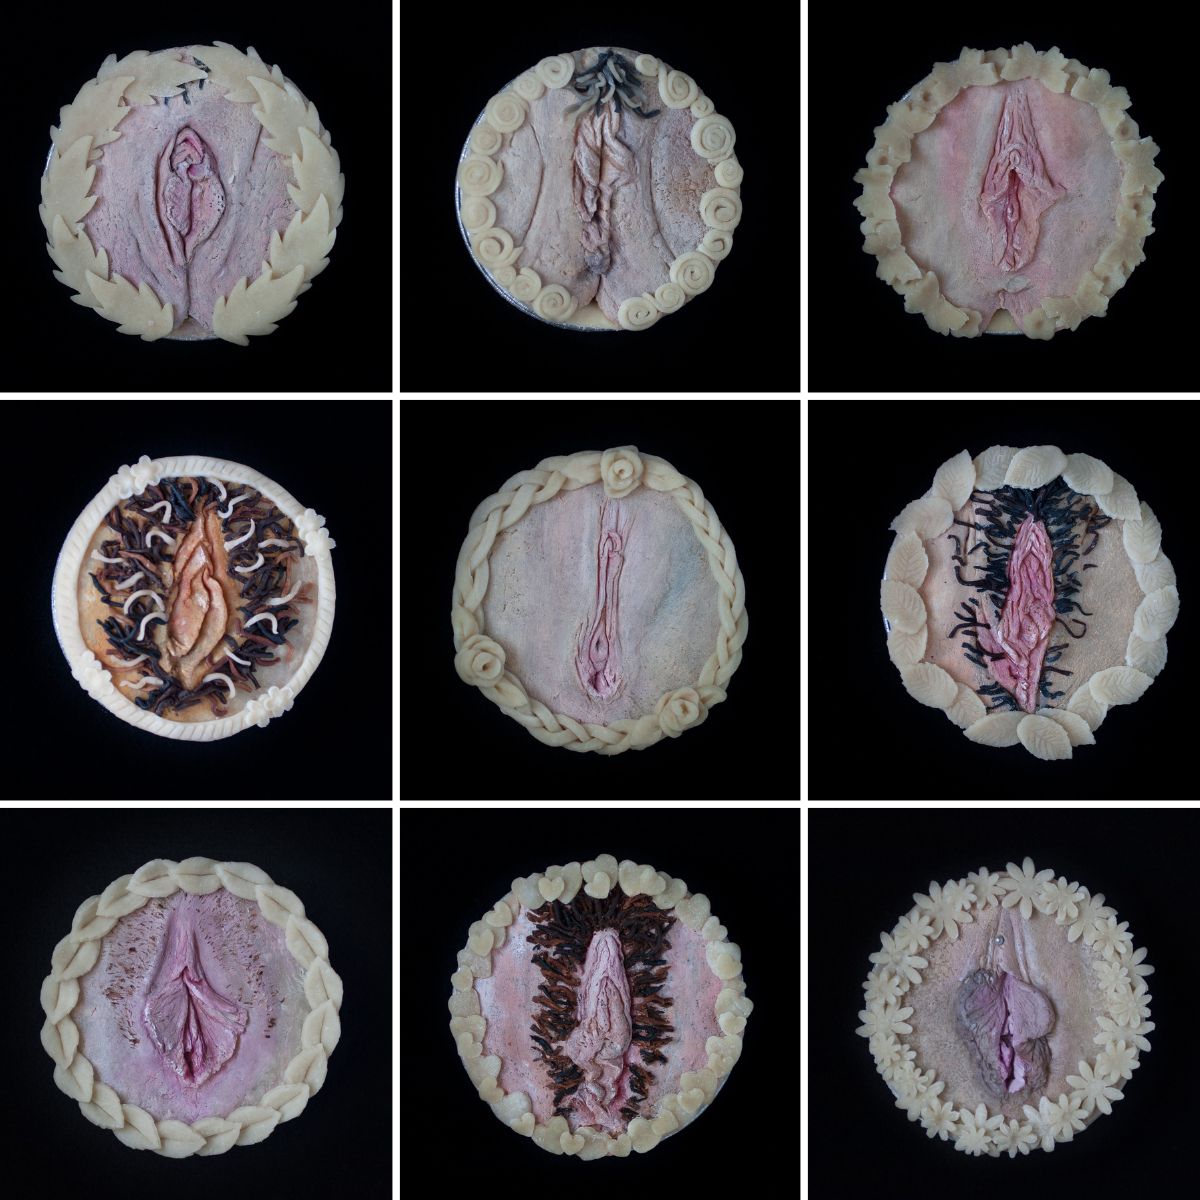 9 vulva pies on black background. Each pie has a different, diverse vulva and pubic hair style. 